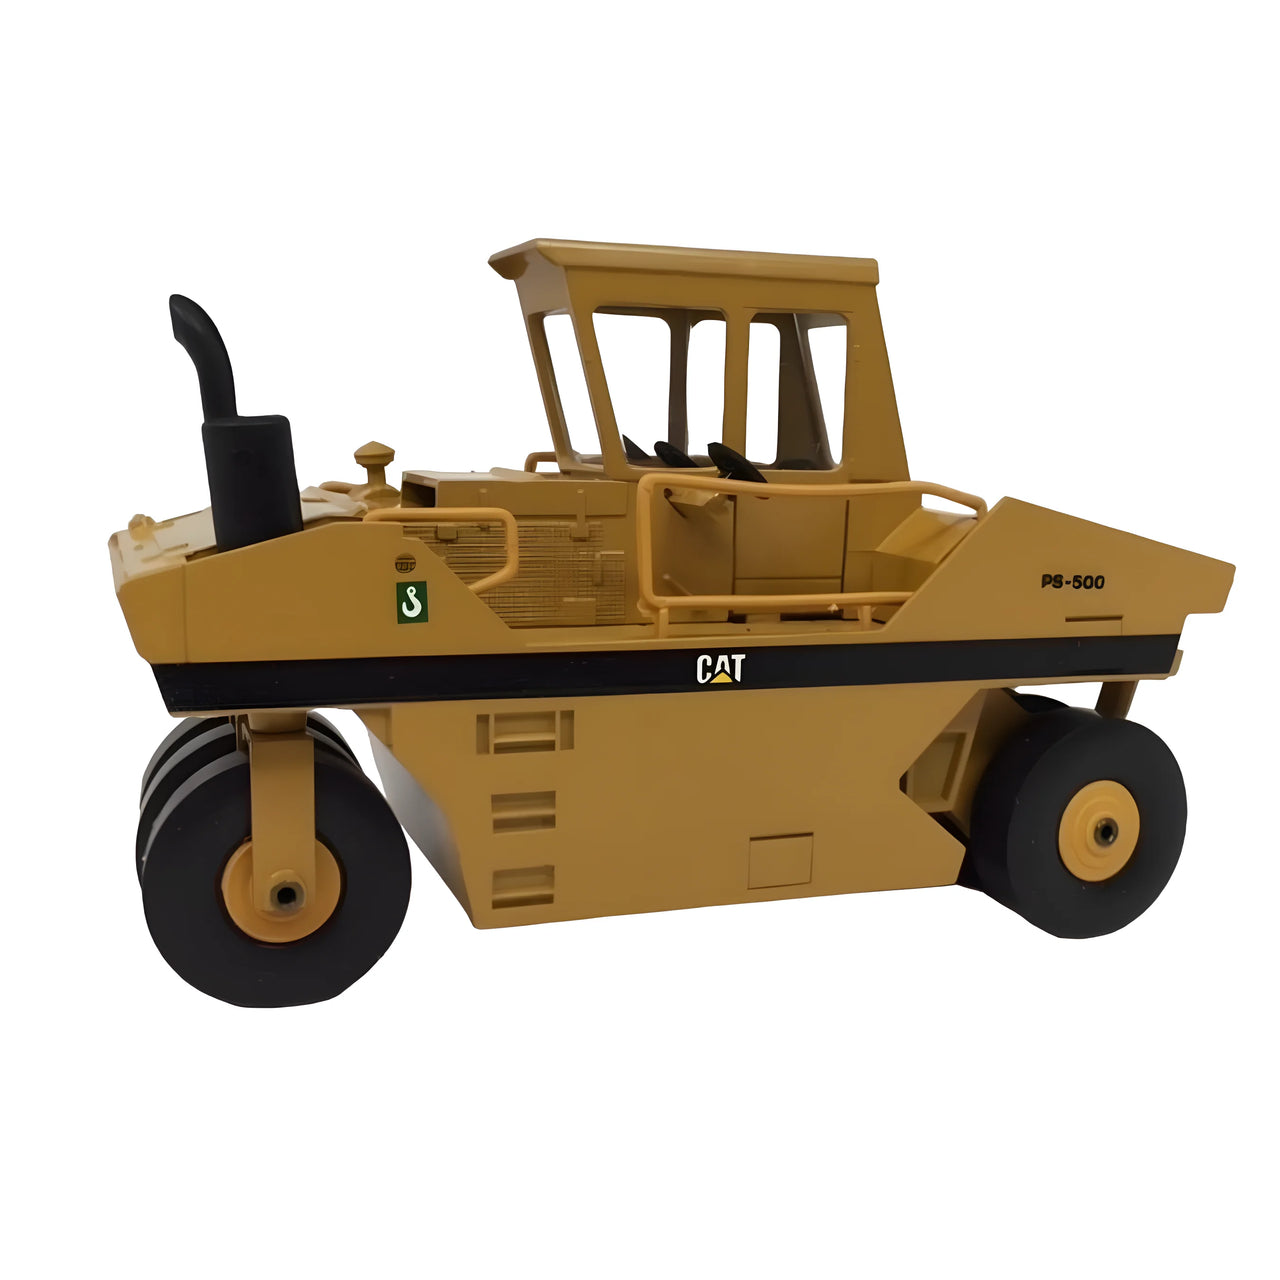 2741.3 PS-500 Wheel Roller 1:50 Scale (Discontinued Model)